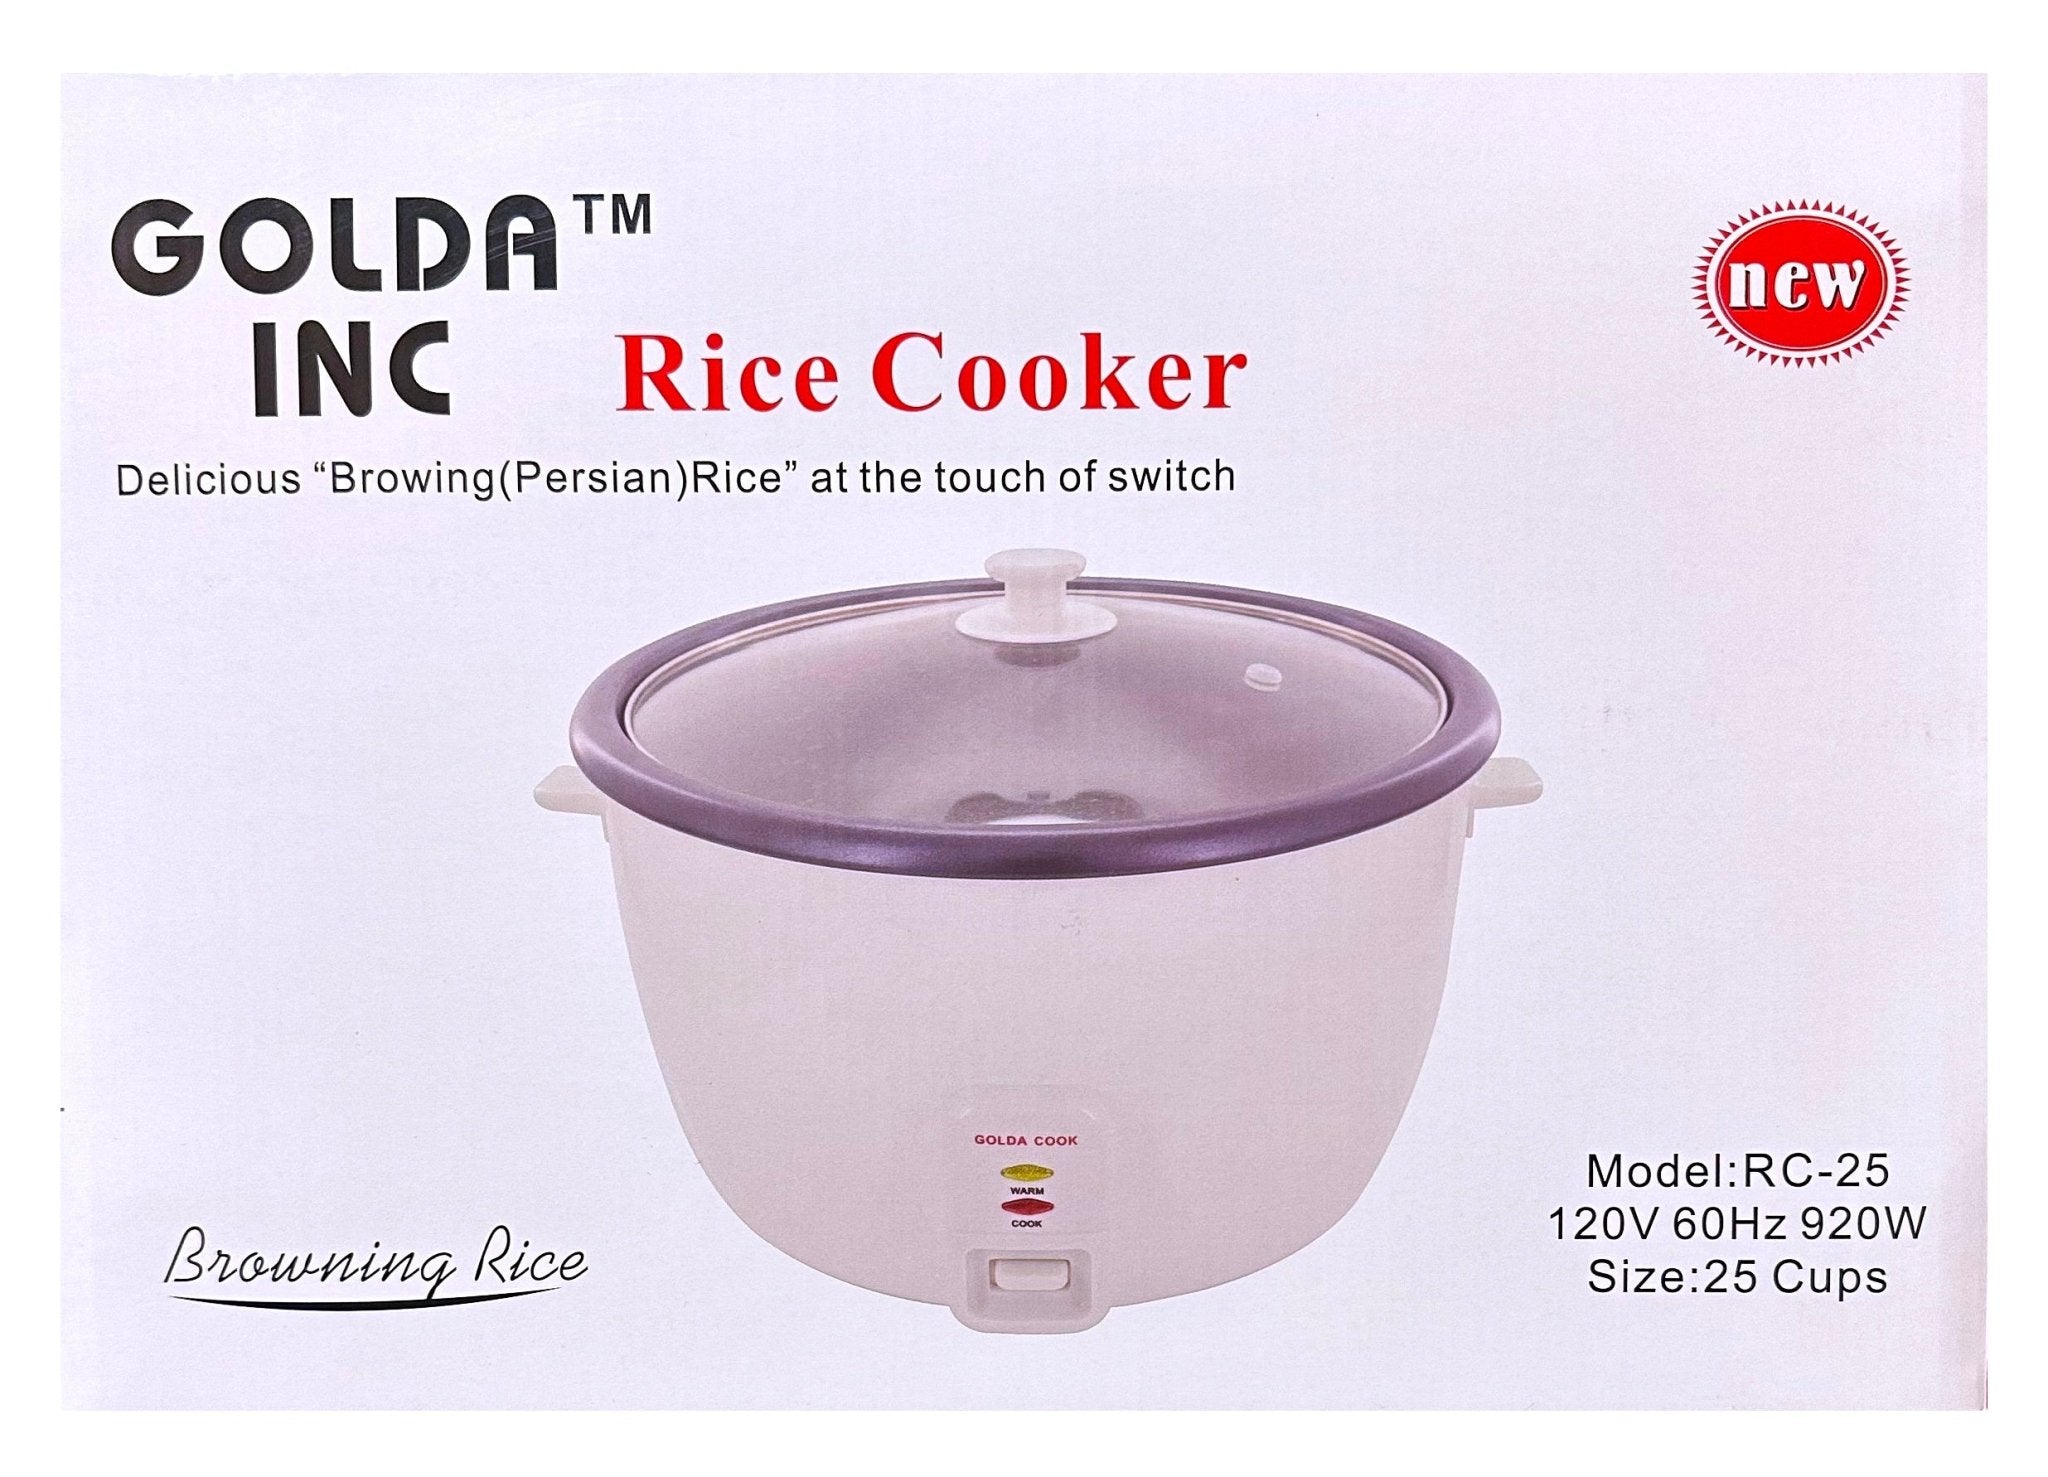 Rice Cooker Automatic - 25 Cup - Rice Crust Maker (PoloPaz, Tahdig Maker)